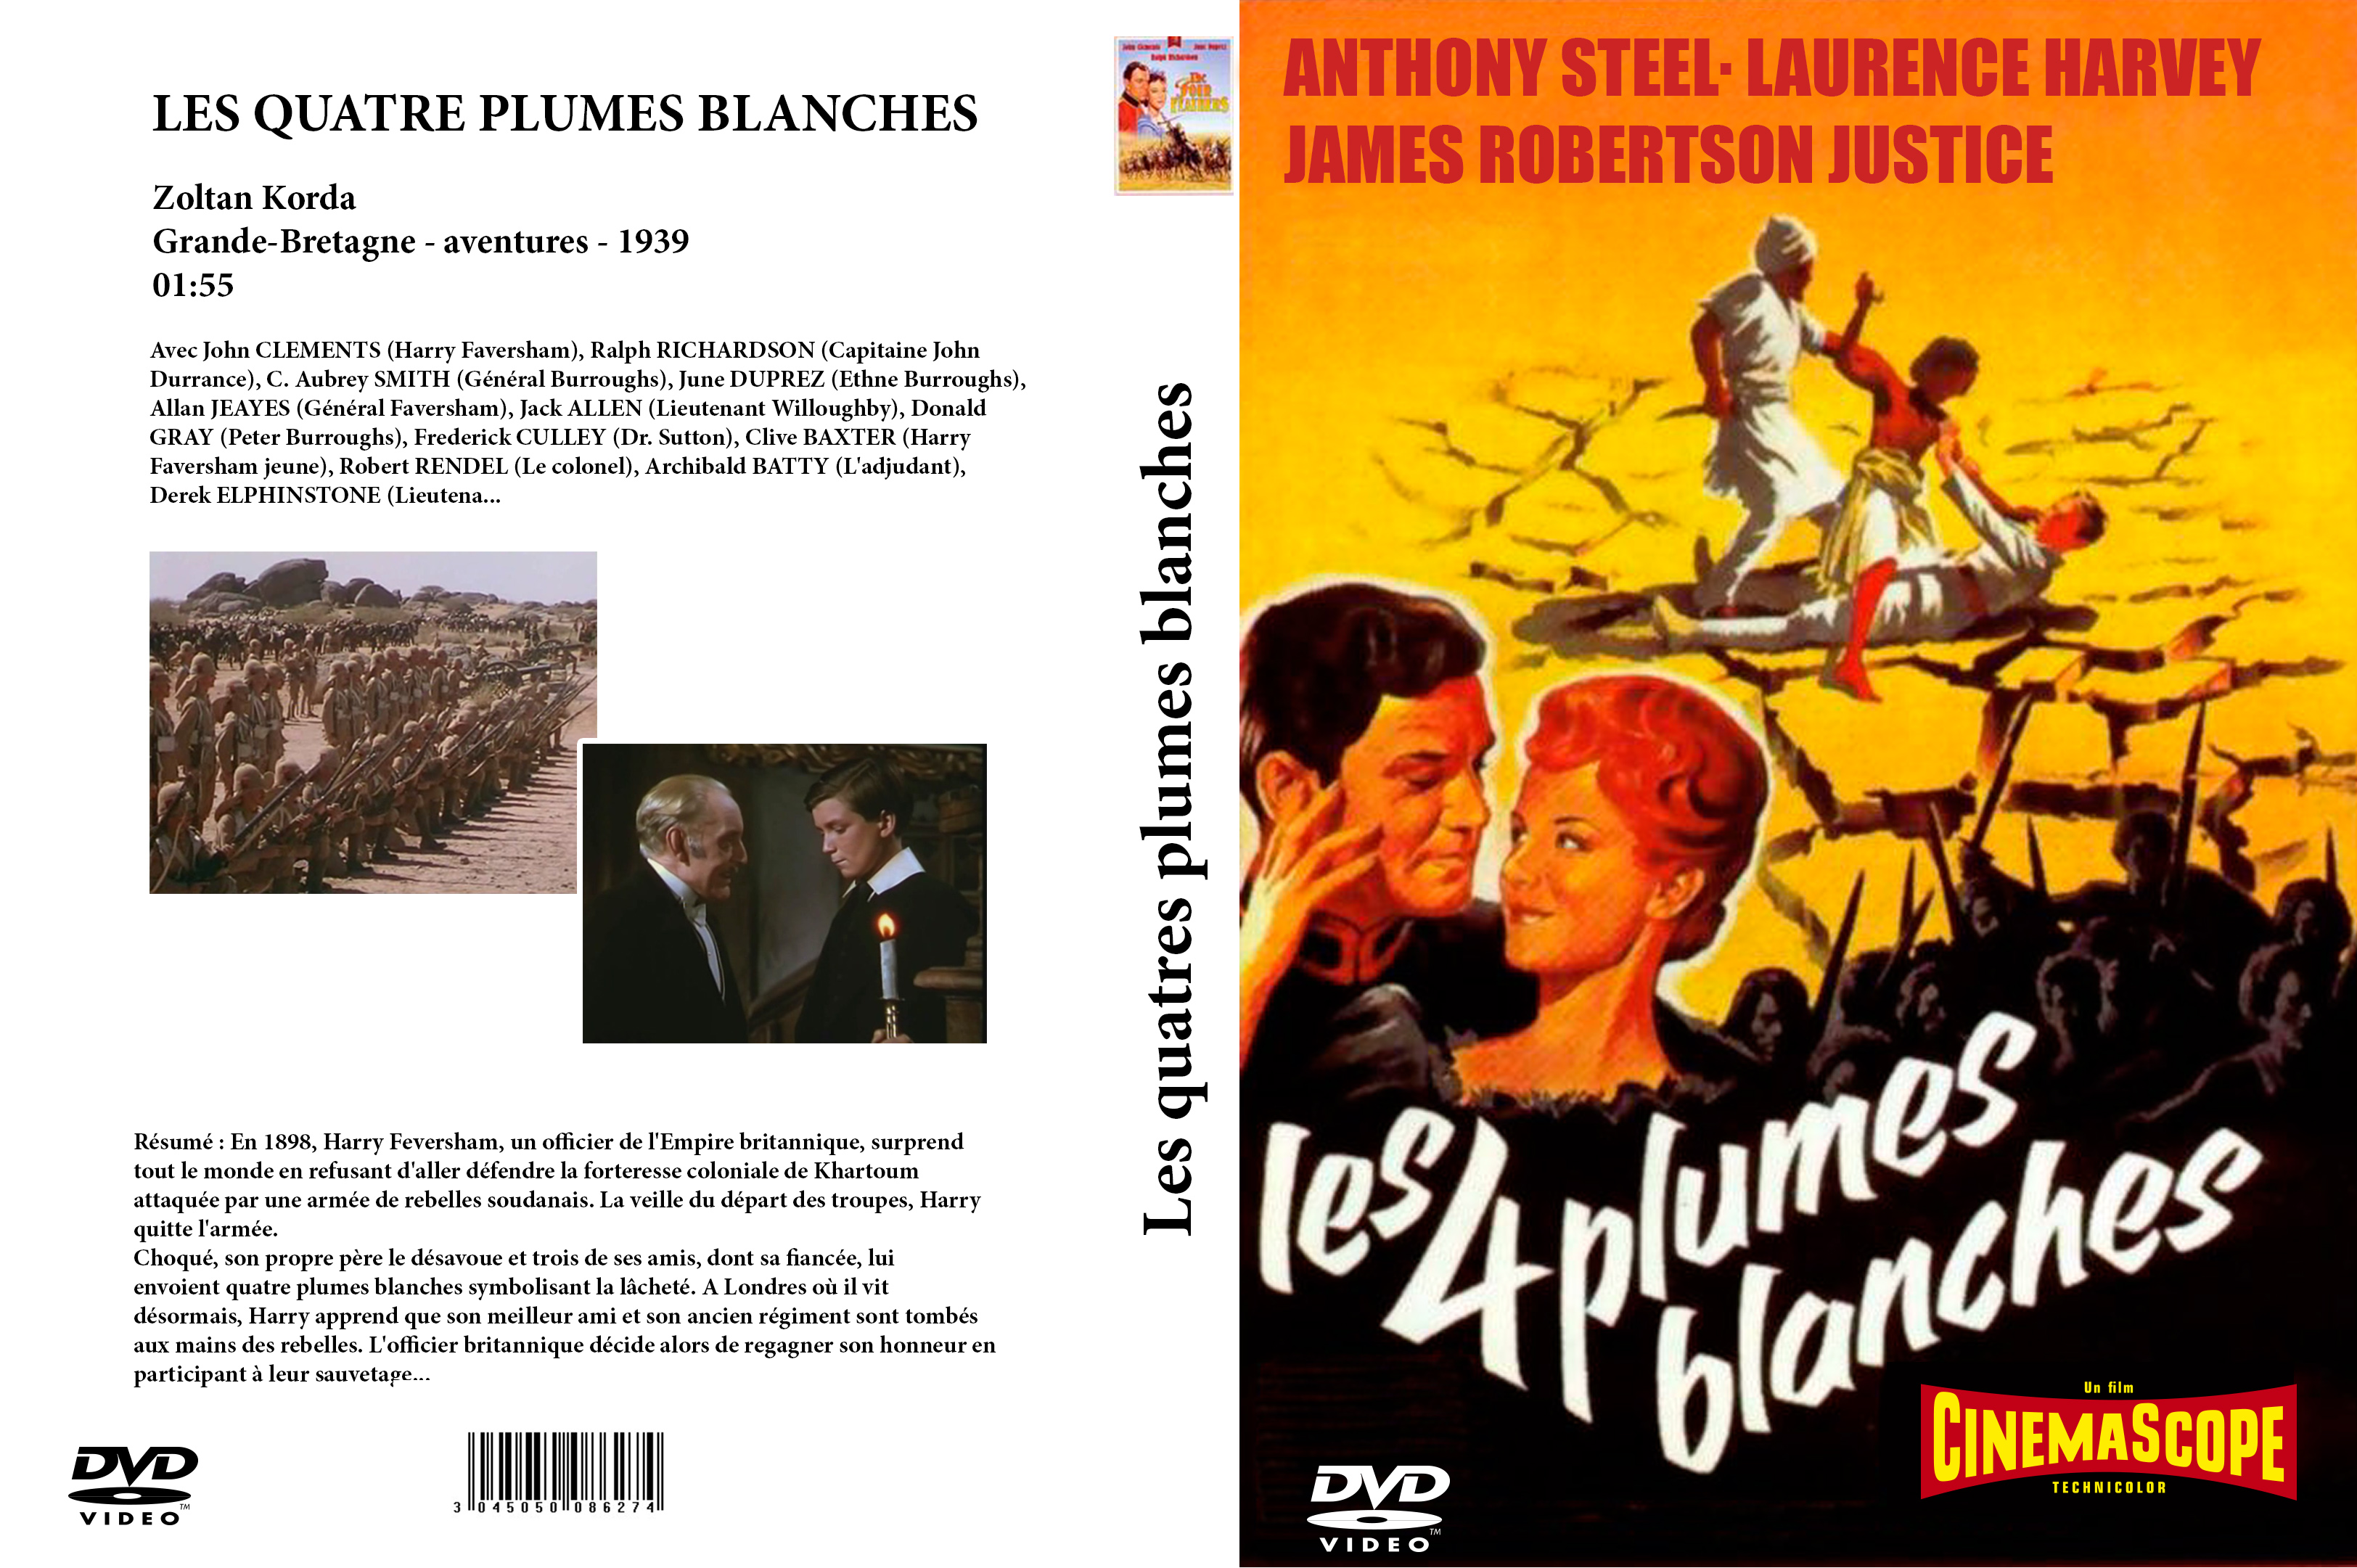 Jaquette DVD Les 4 plumes blanches custom